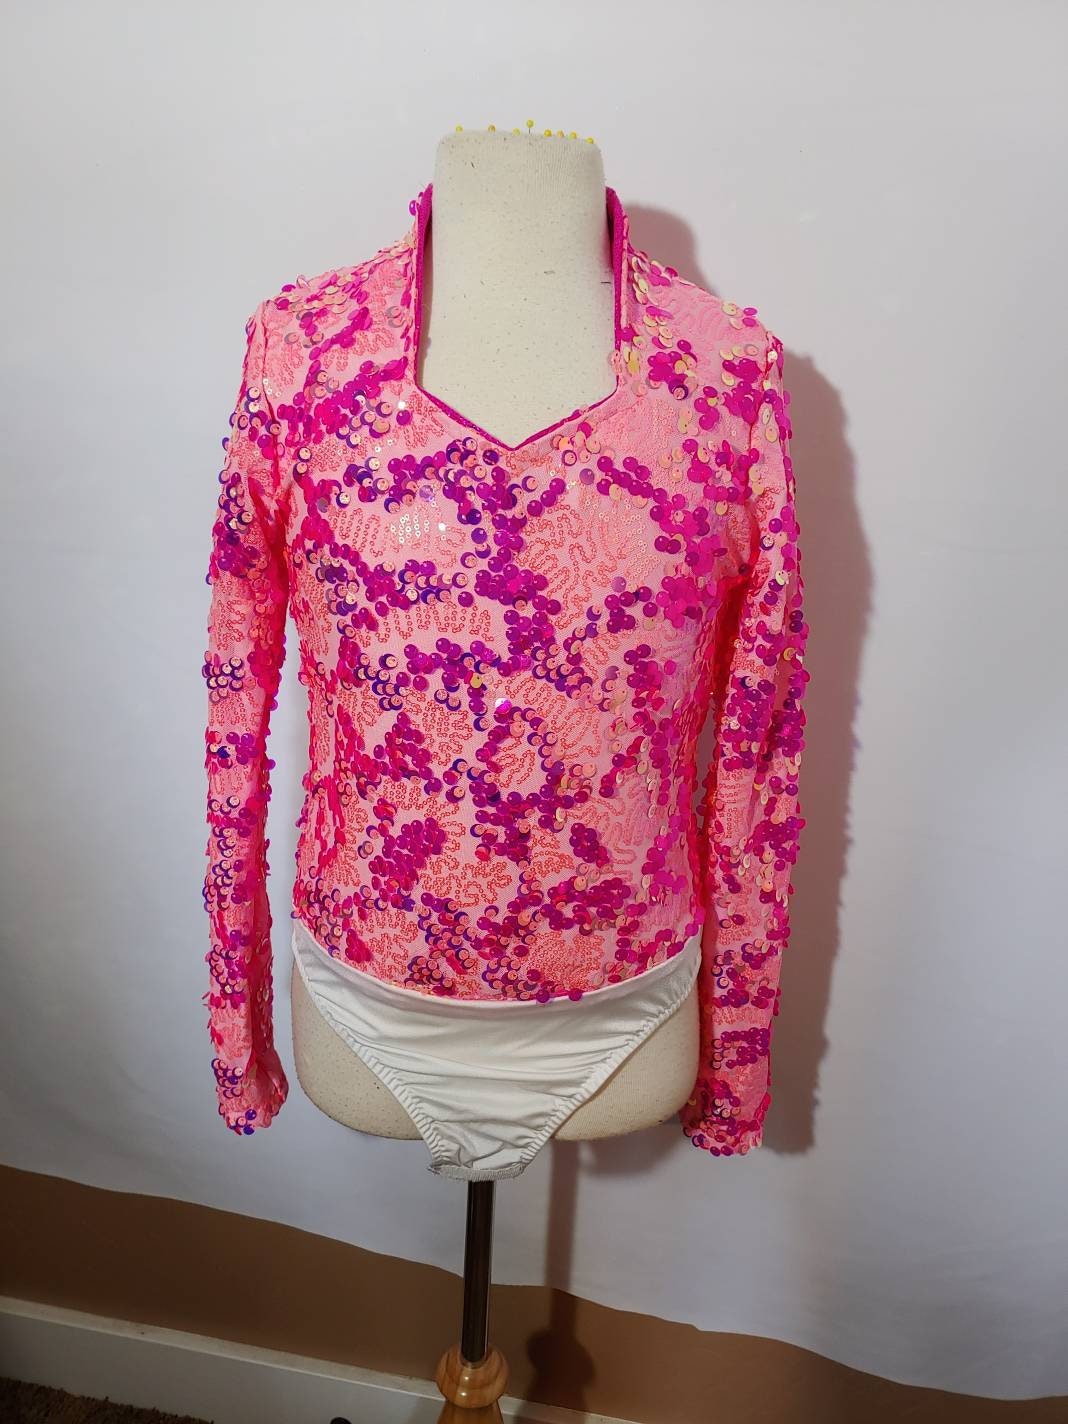 Available Child 5/6 to Adult XL Kleding Meisjeskleding Tops & T-shirts Blouses Neon Pink Under The Sea Rodeo Queen Arena Shirt 